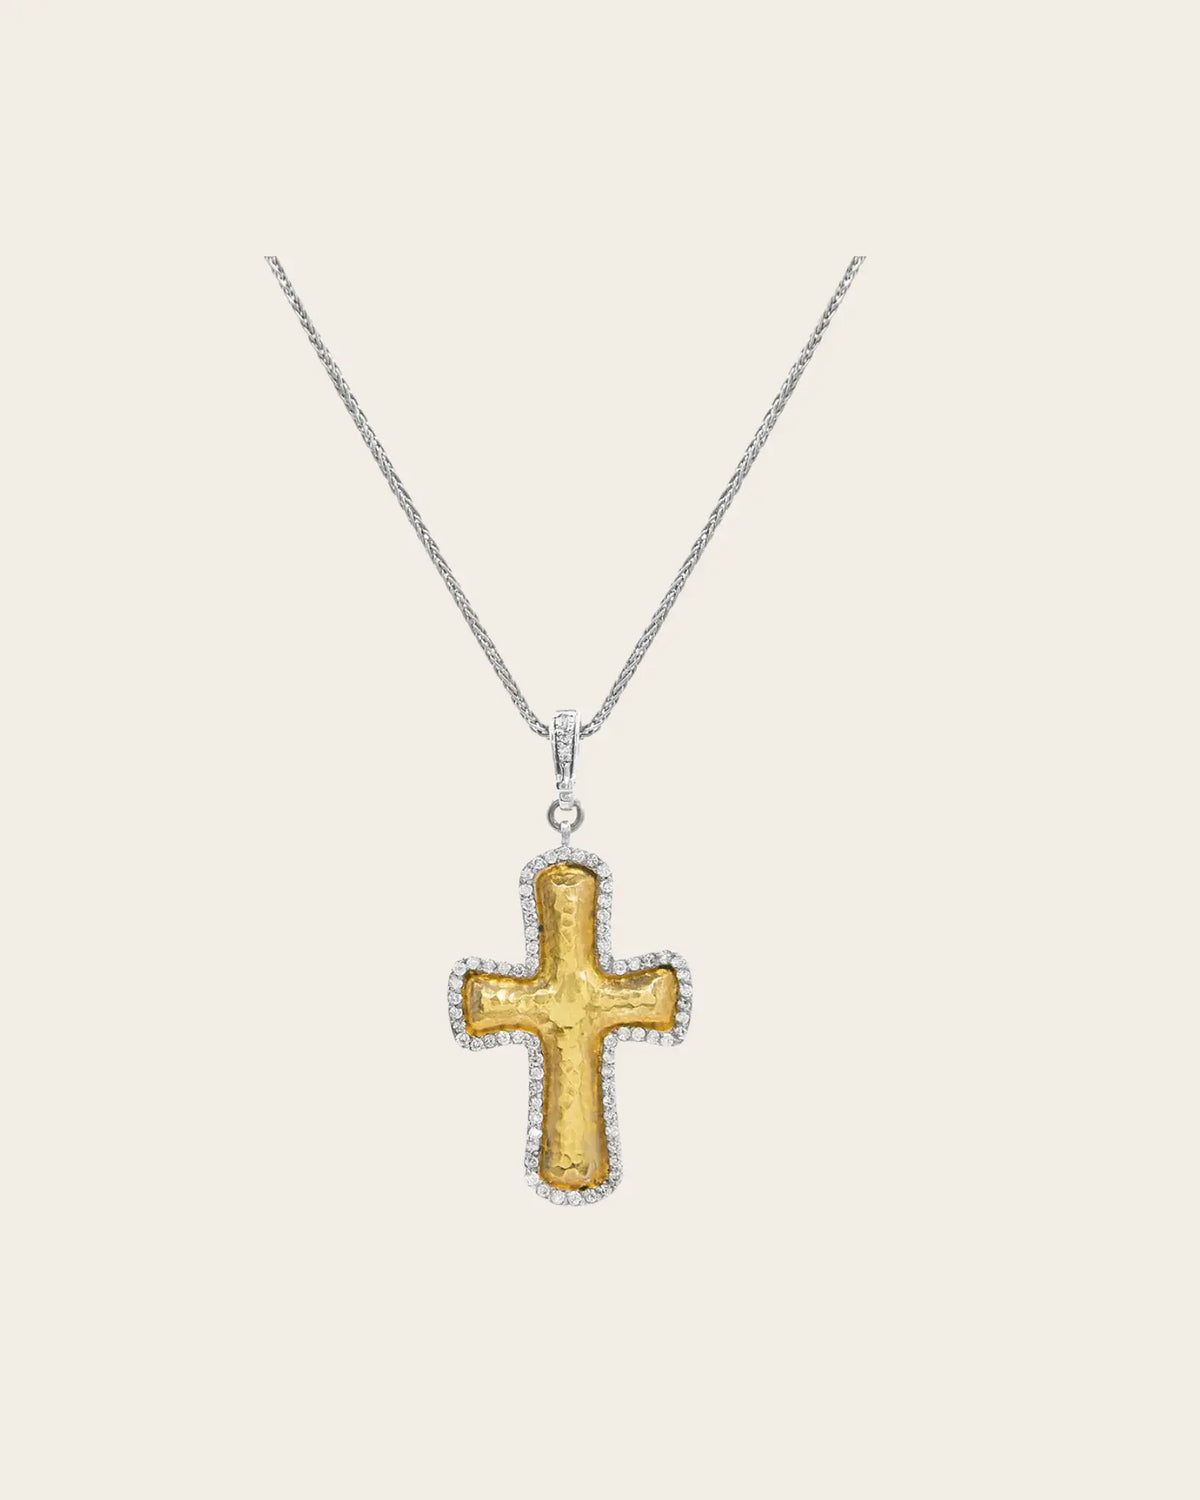 Cross Sterling Silver Pendant Necklace, Pave Cross, with Diamond Cross Sterling Silver Pendant Necklace, Pave Cross, with Diamond Gurhan Gurhan  Squash Blossom Vail